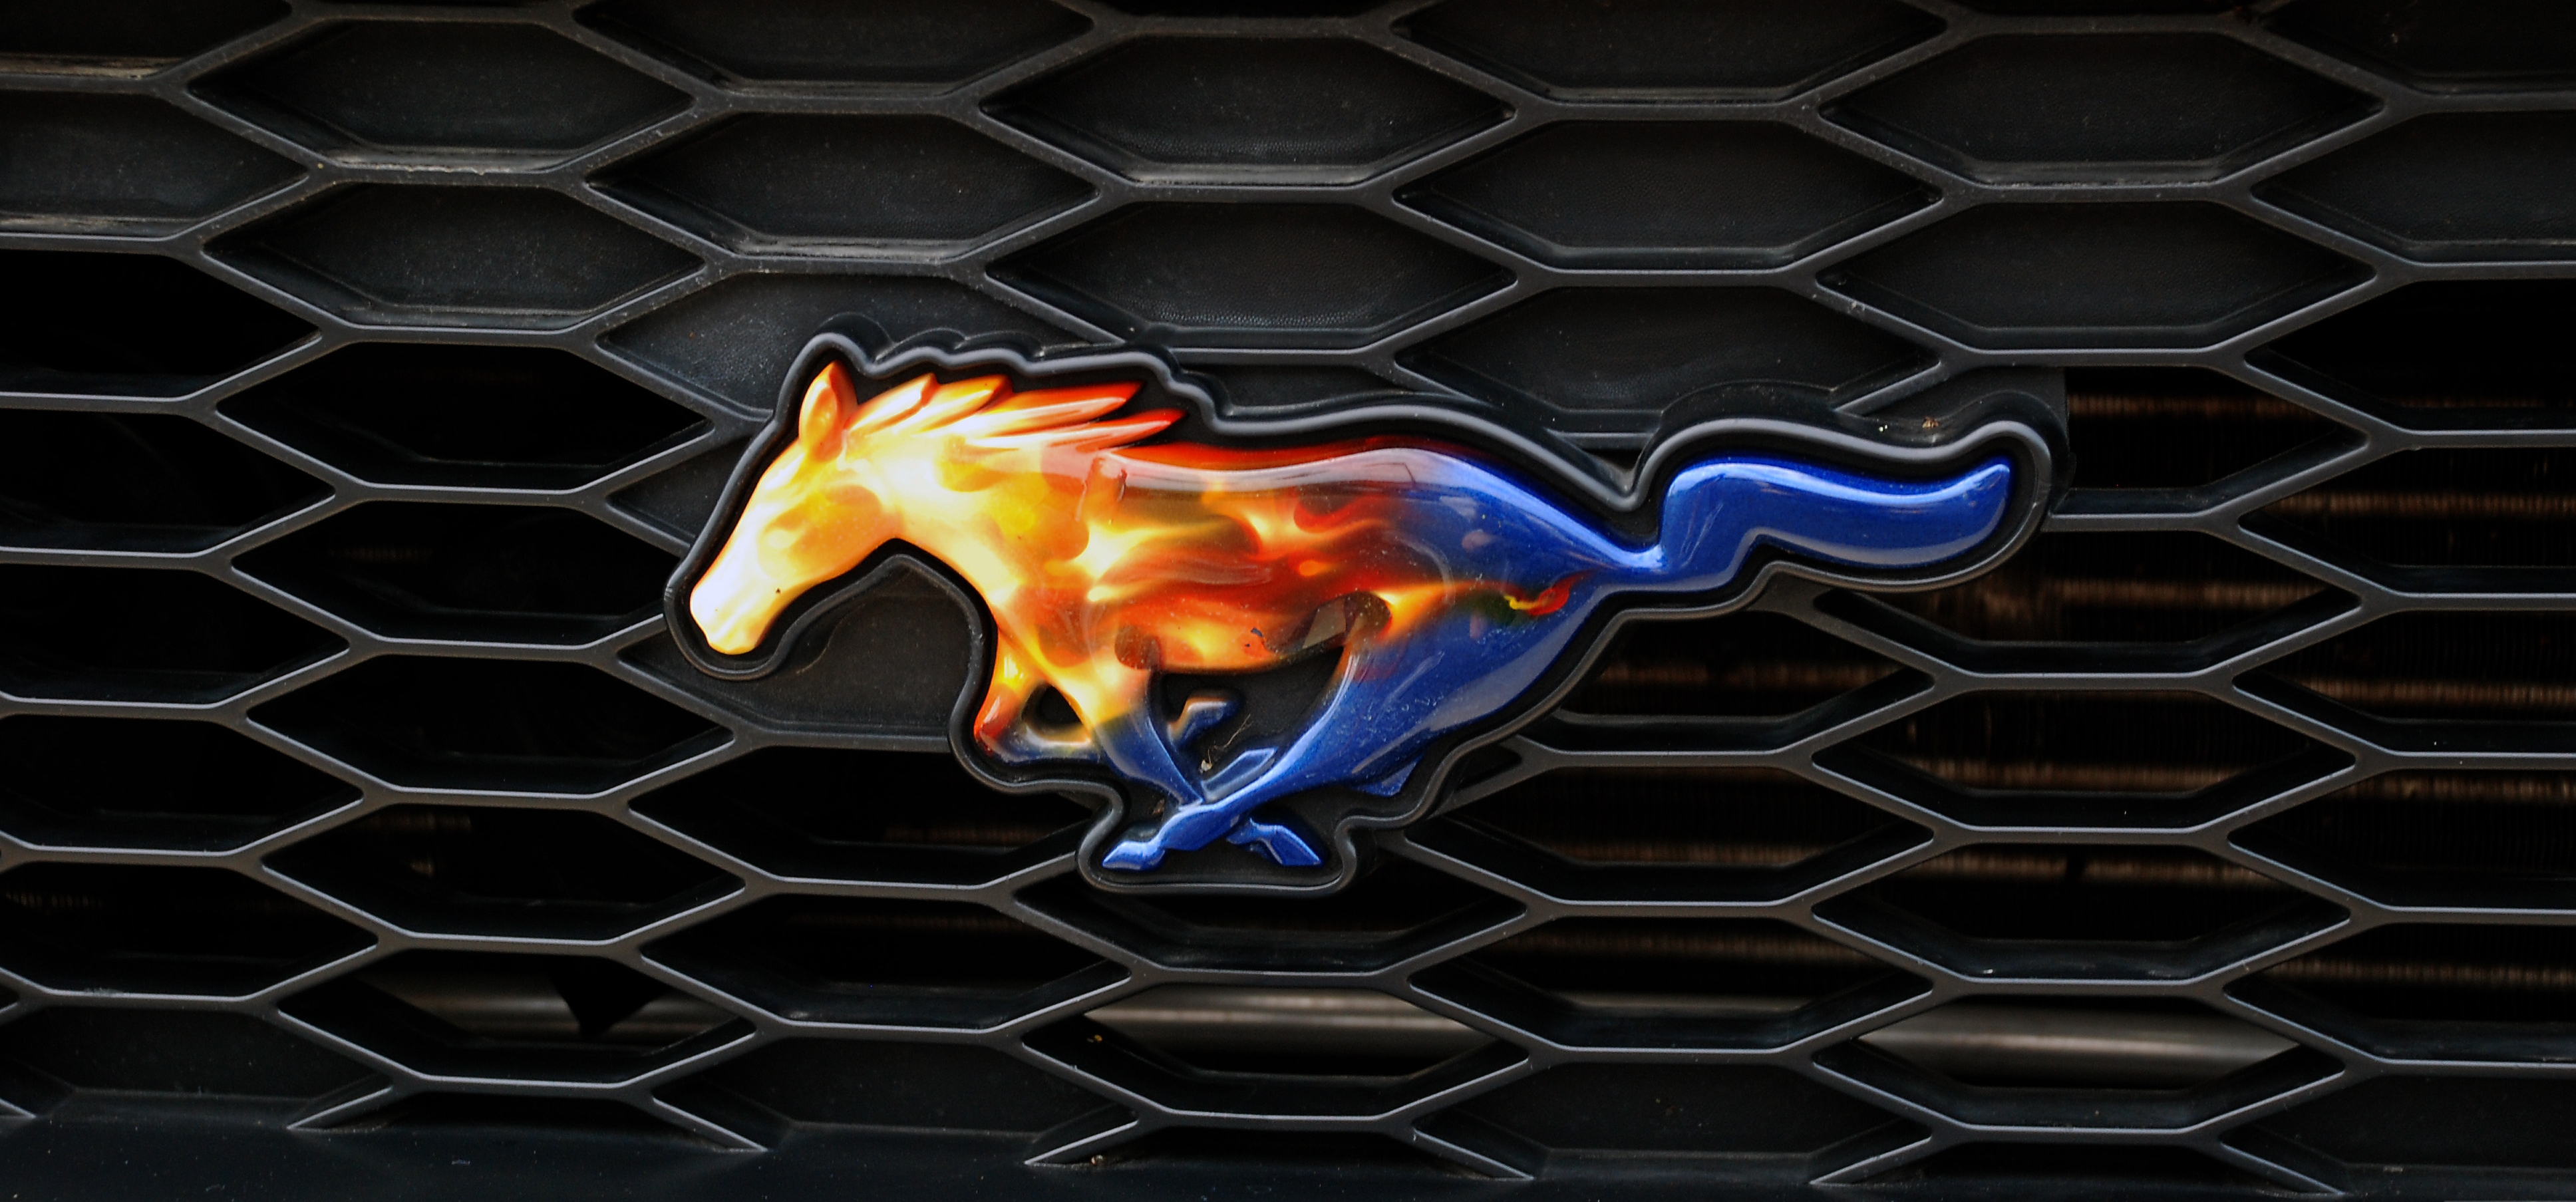 Ford Mustang Logo Wallpapers - Wallpaper Cave